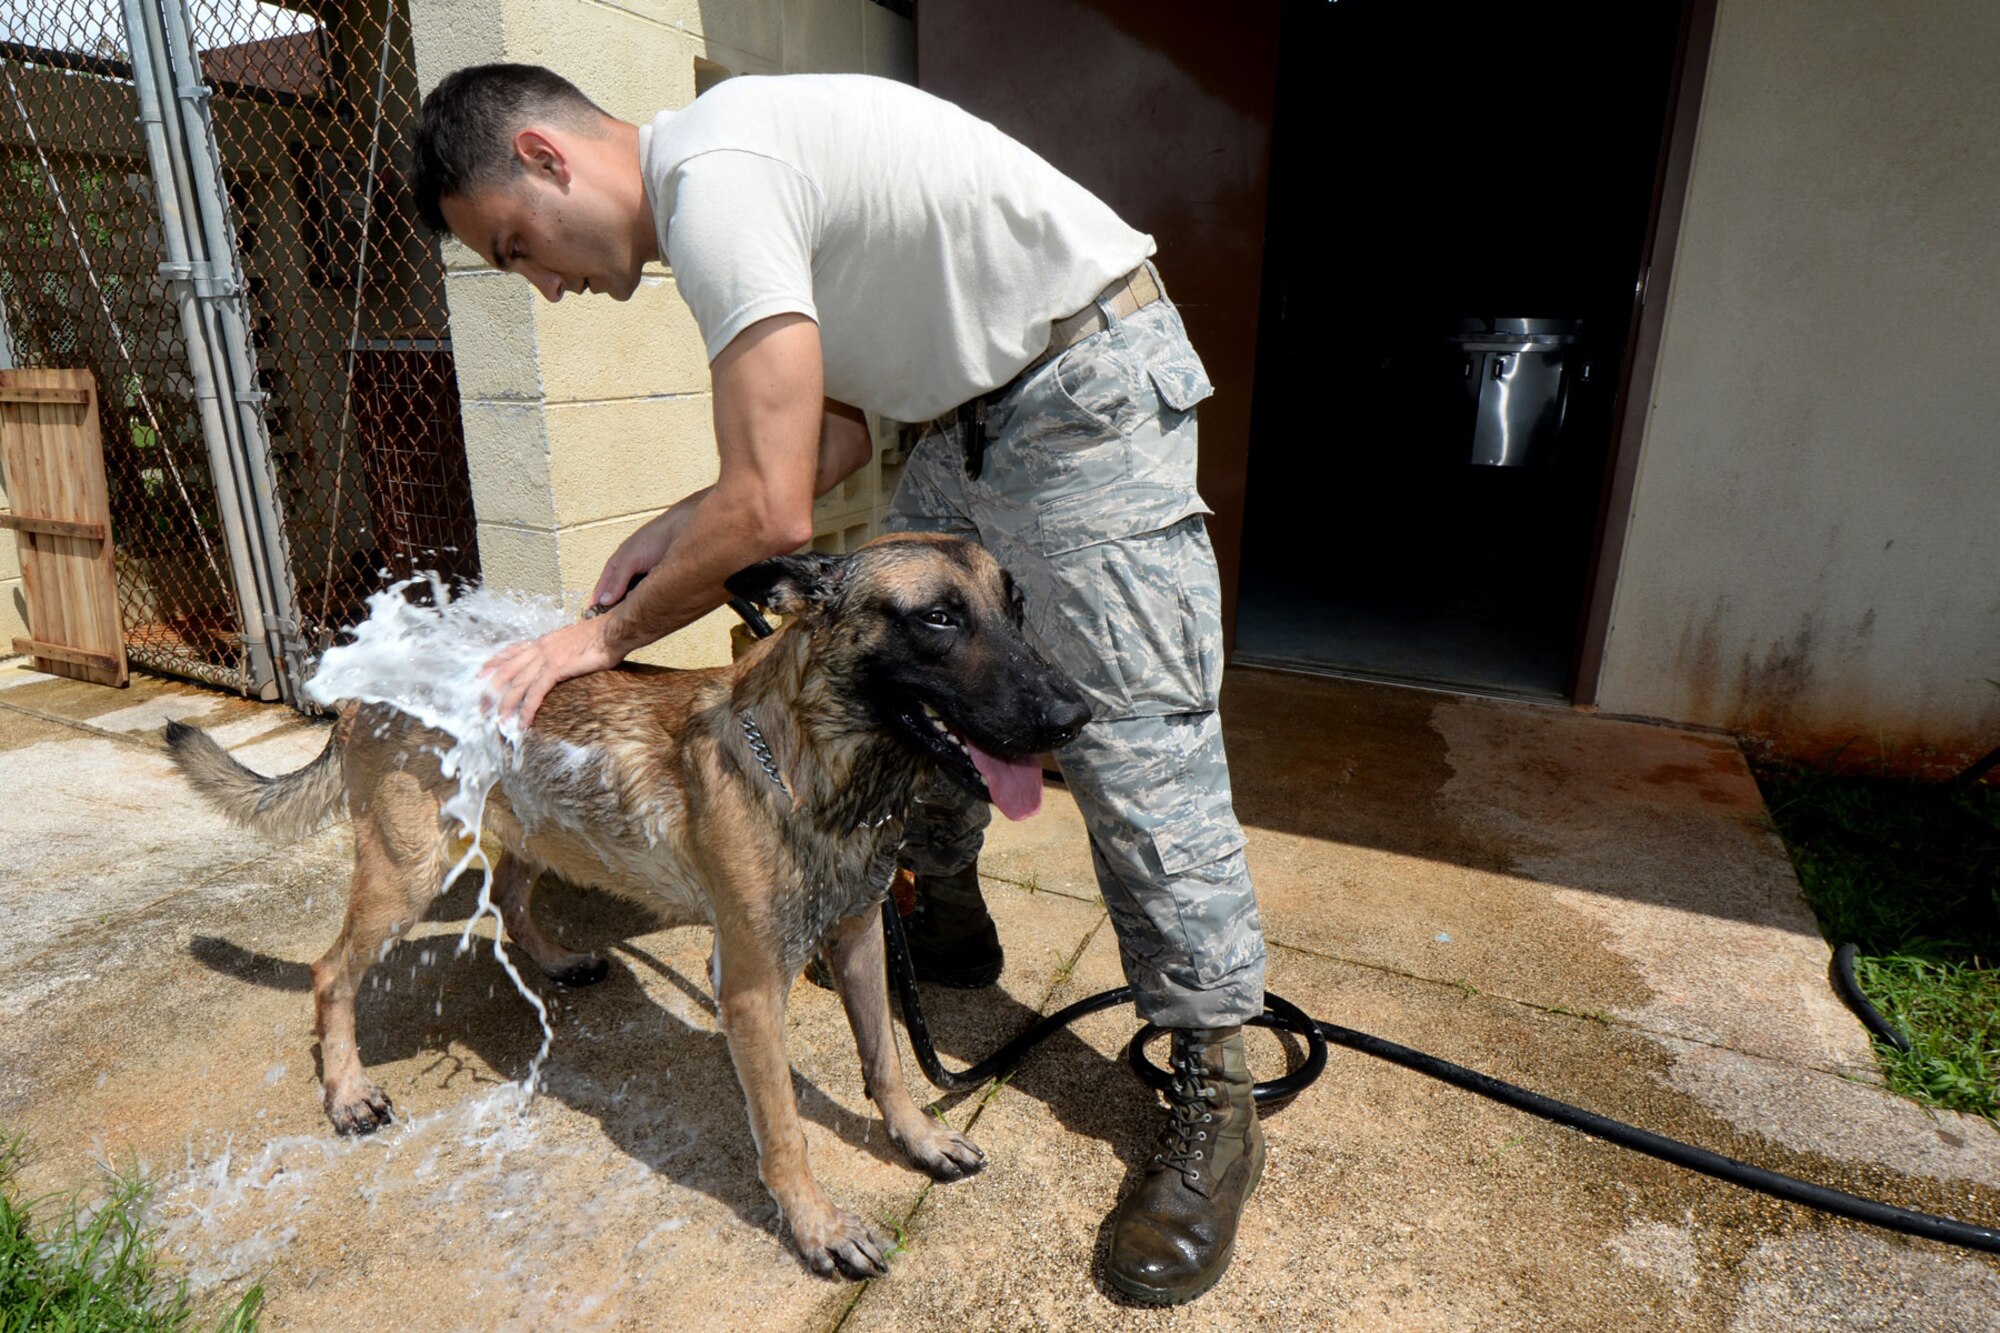 Senior Airman Casey Wheatley, 36th Security Forces Squadron dog handler, bathes his military working dog Ramos after a grueling day of training Oct. 28, 2015, at Andersen Air Force Base, Guam. On top of training, handlers must also take care of their dogs in other aspects including bathing and veterinary appointments. (U.S. Air Force photo by Airman 1st Class Alexa Ann Henderson/Released) 